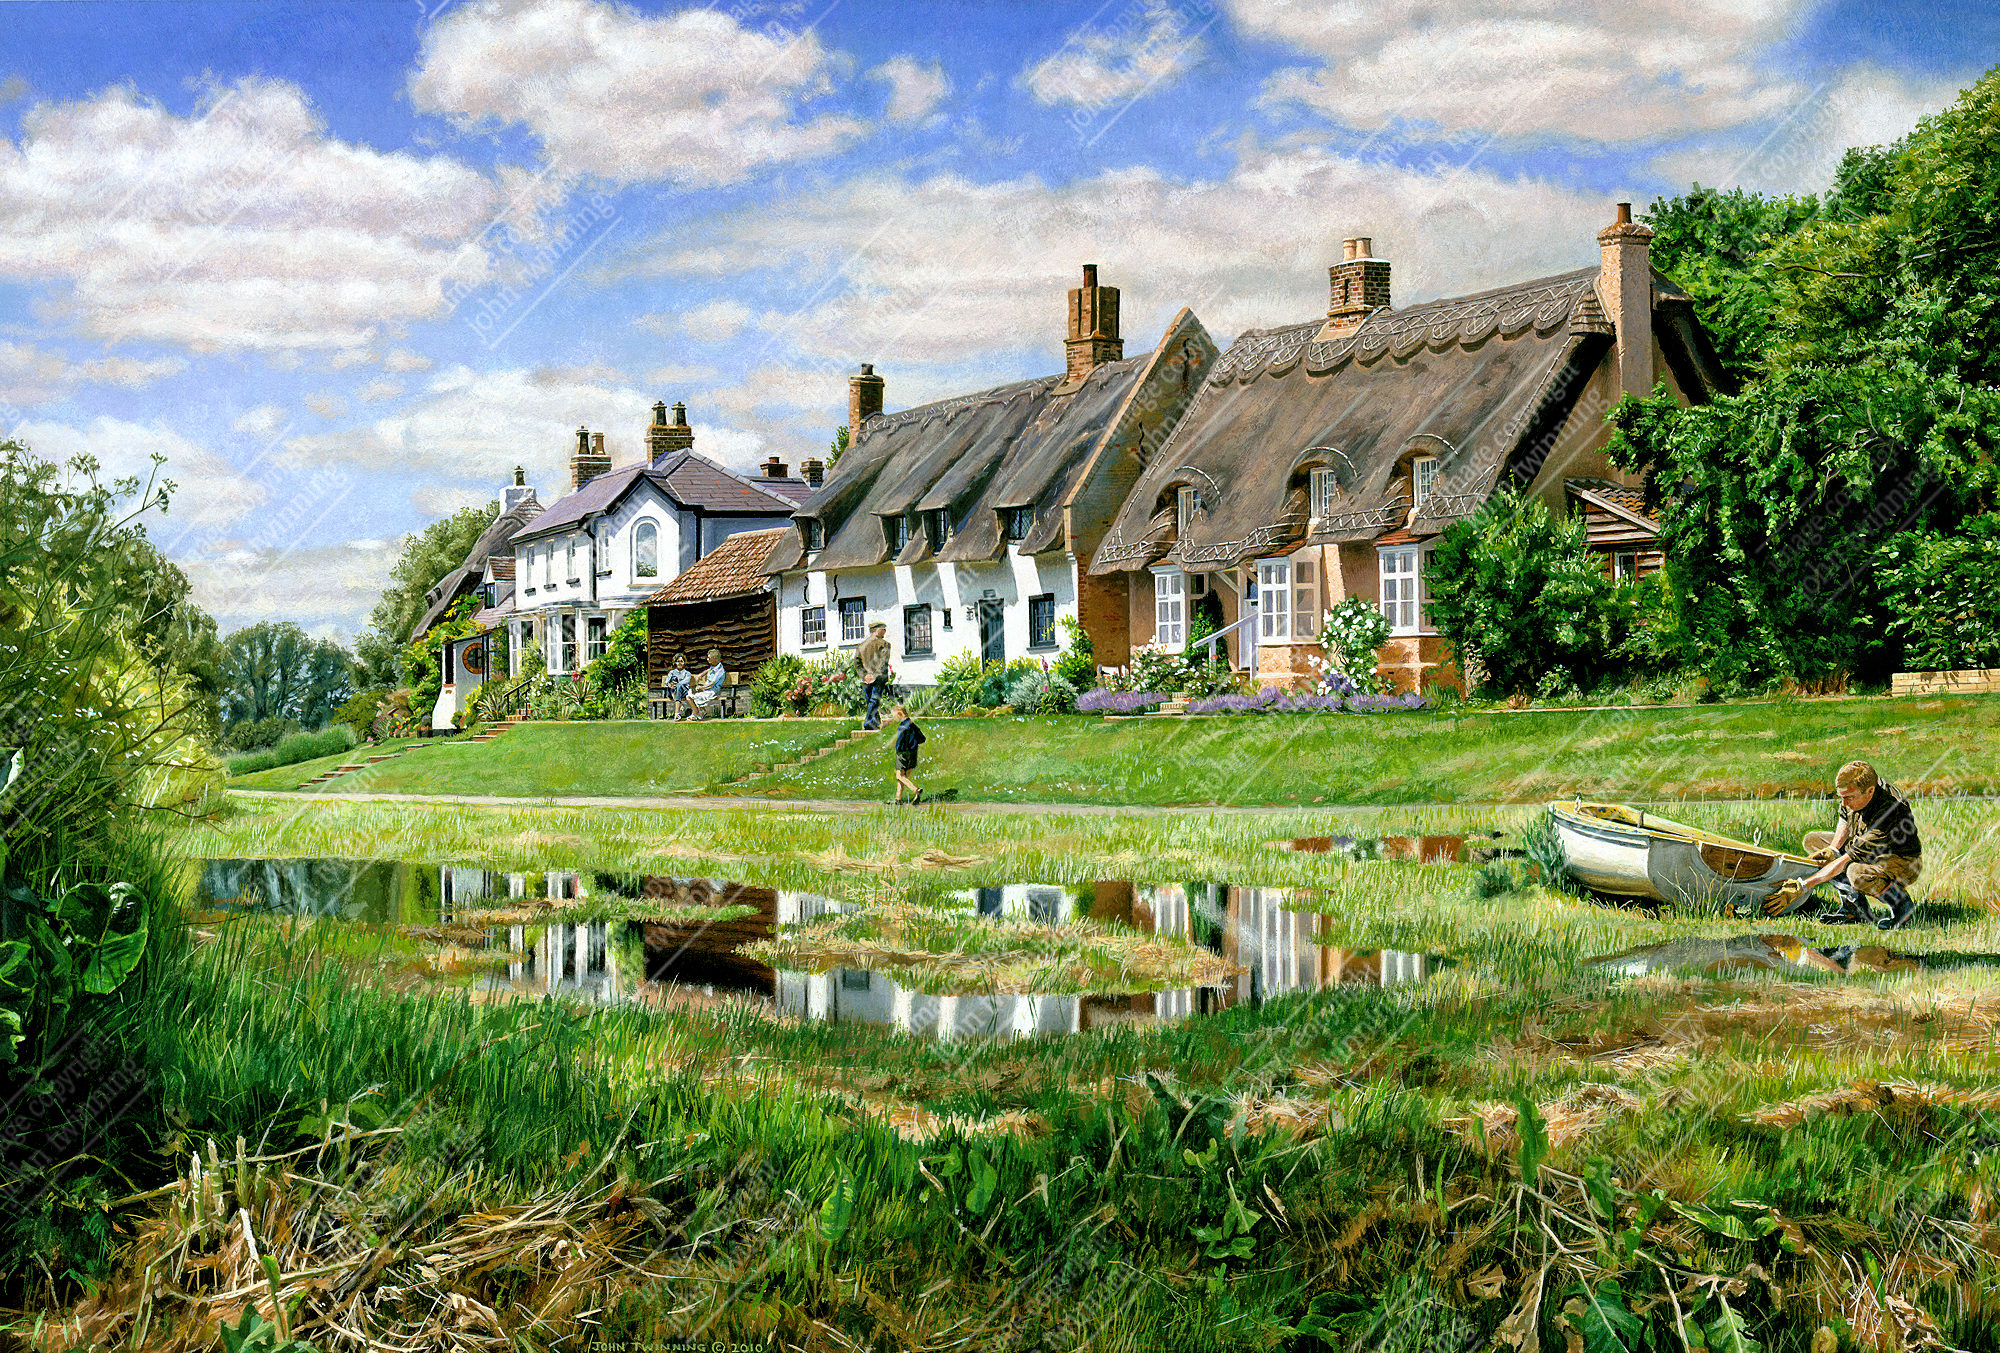 'Reflections Of Holywell, Cambridgeshire' art print from a painting of a country village scene